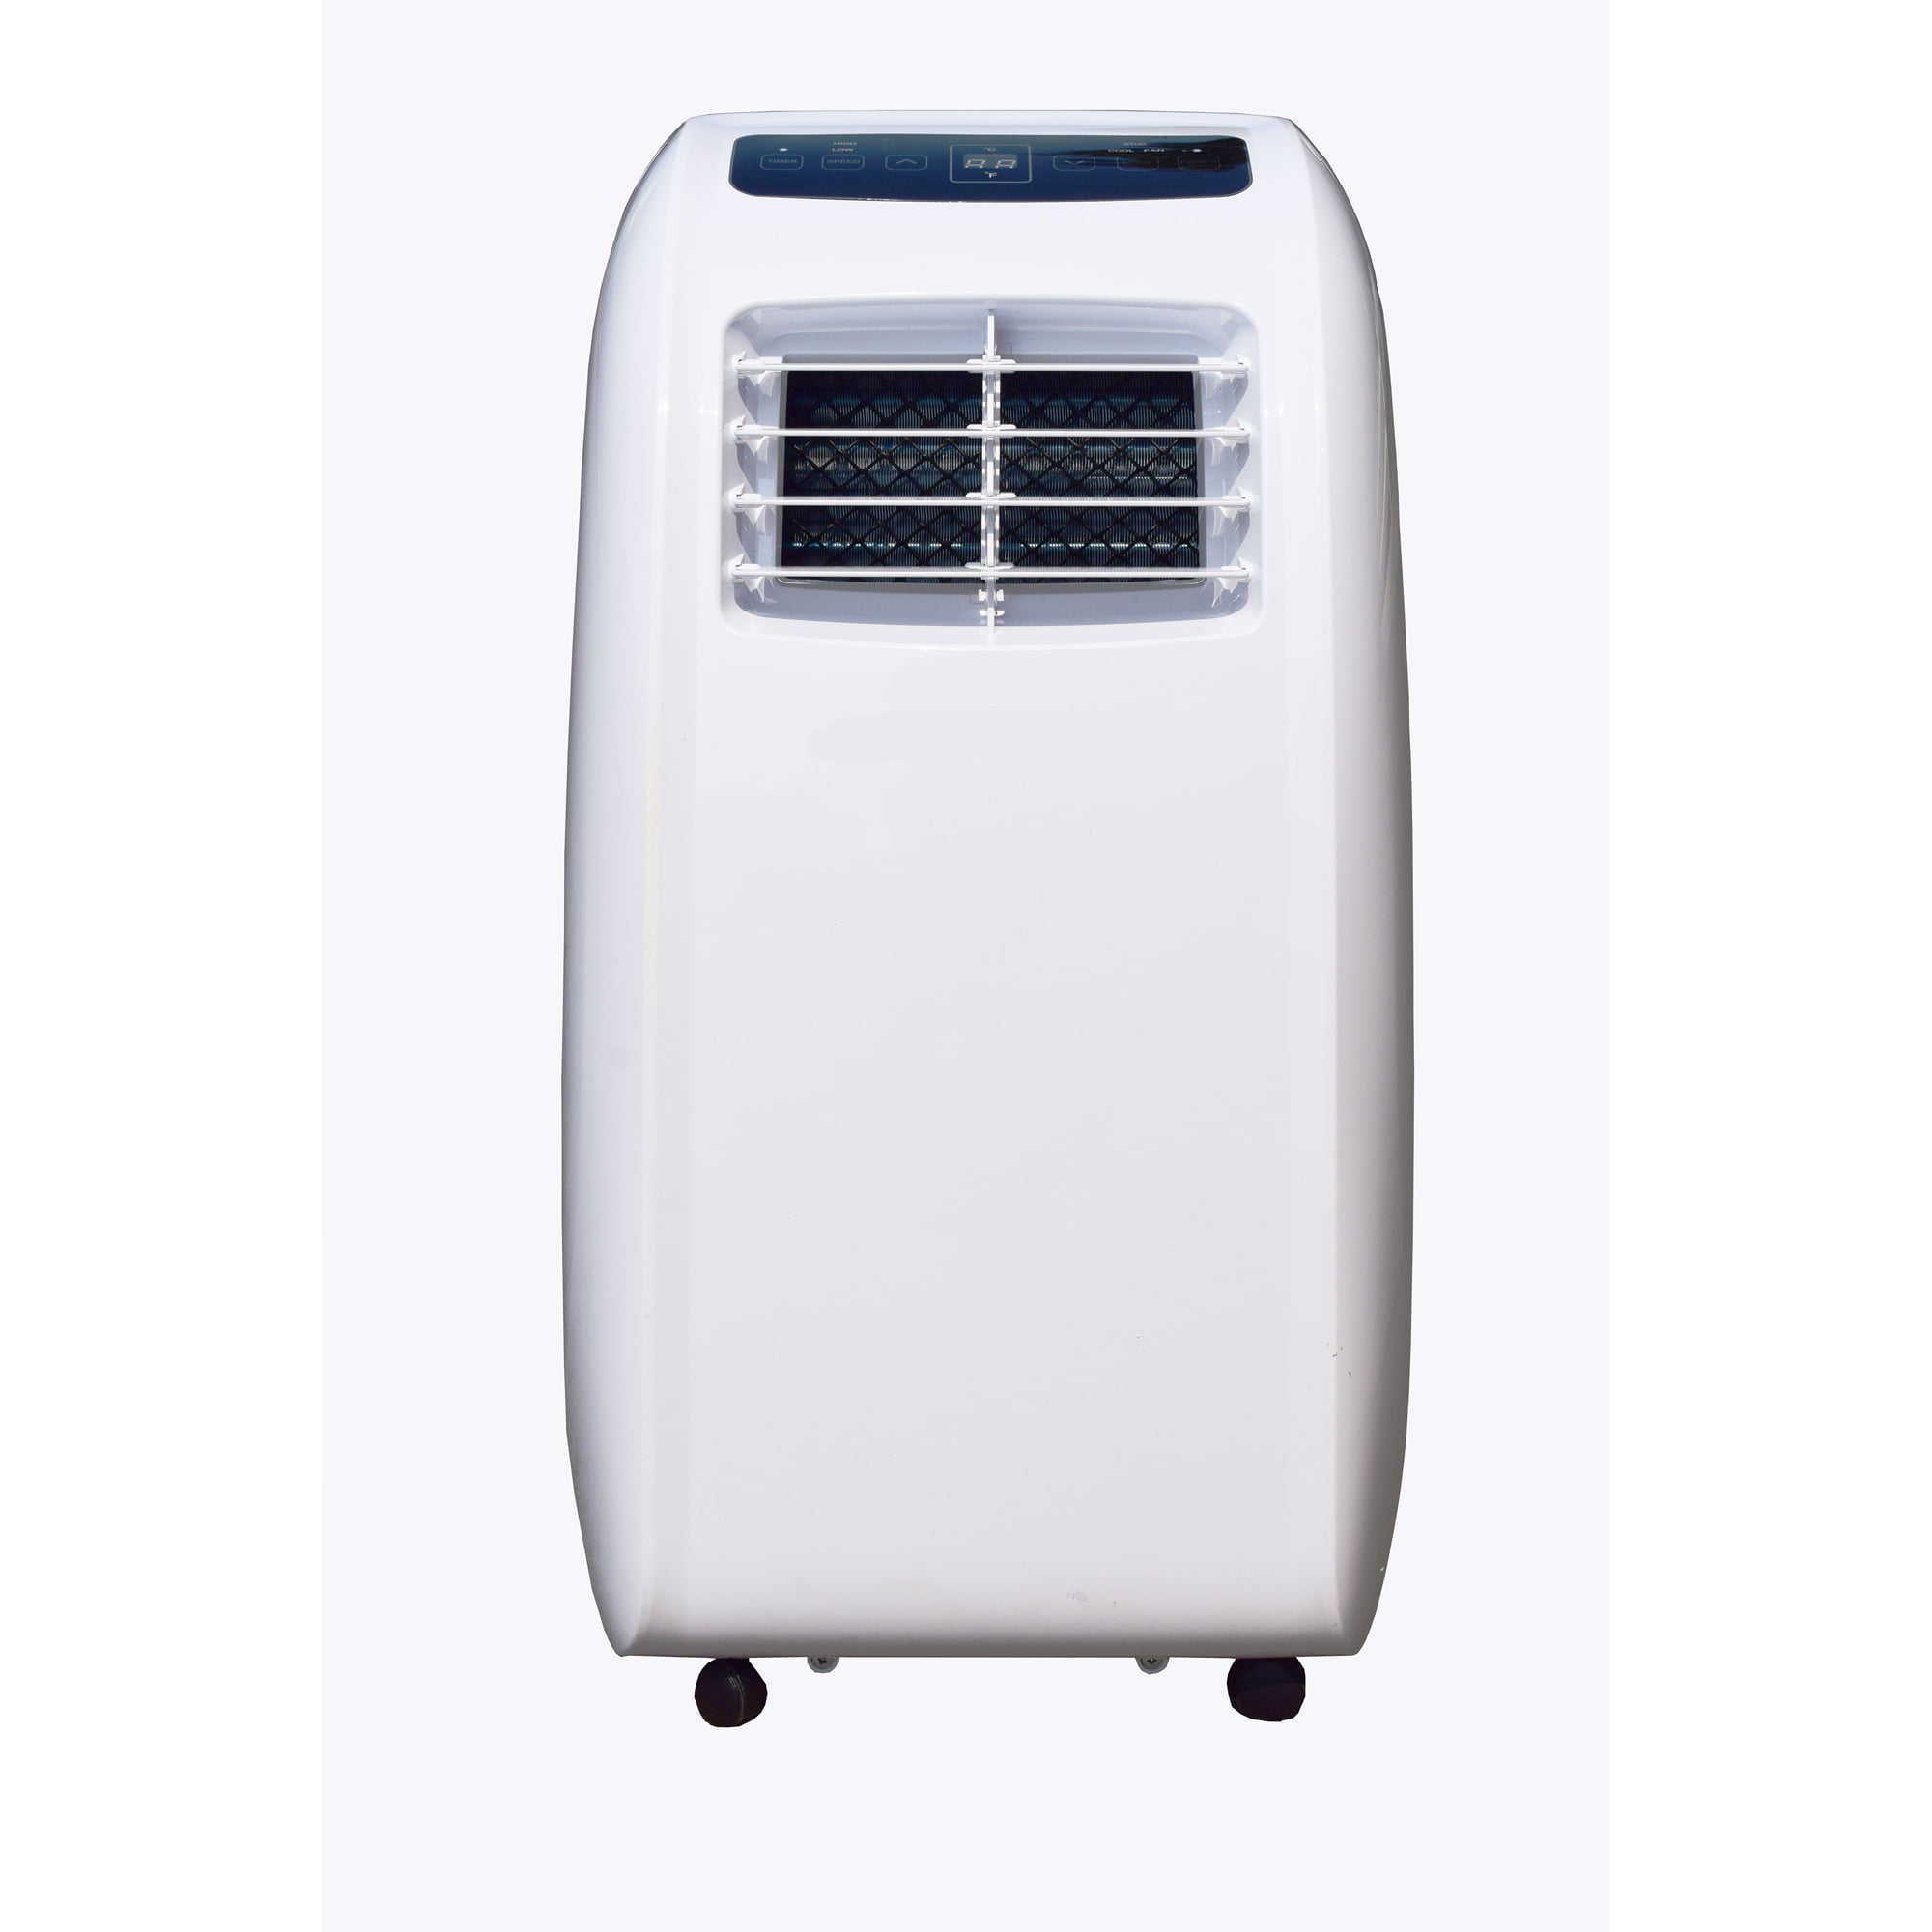 FACTORY RECONDITIONED CCH YPLA08C 8,000 BTU 3 in 1 "Ultra Compact" Portable Air Conditioner